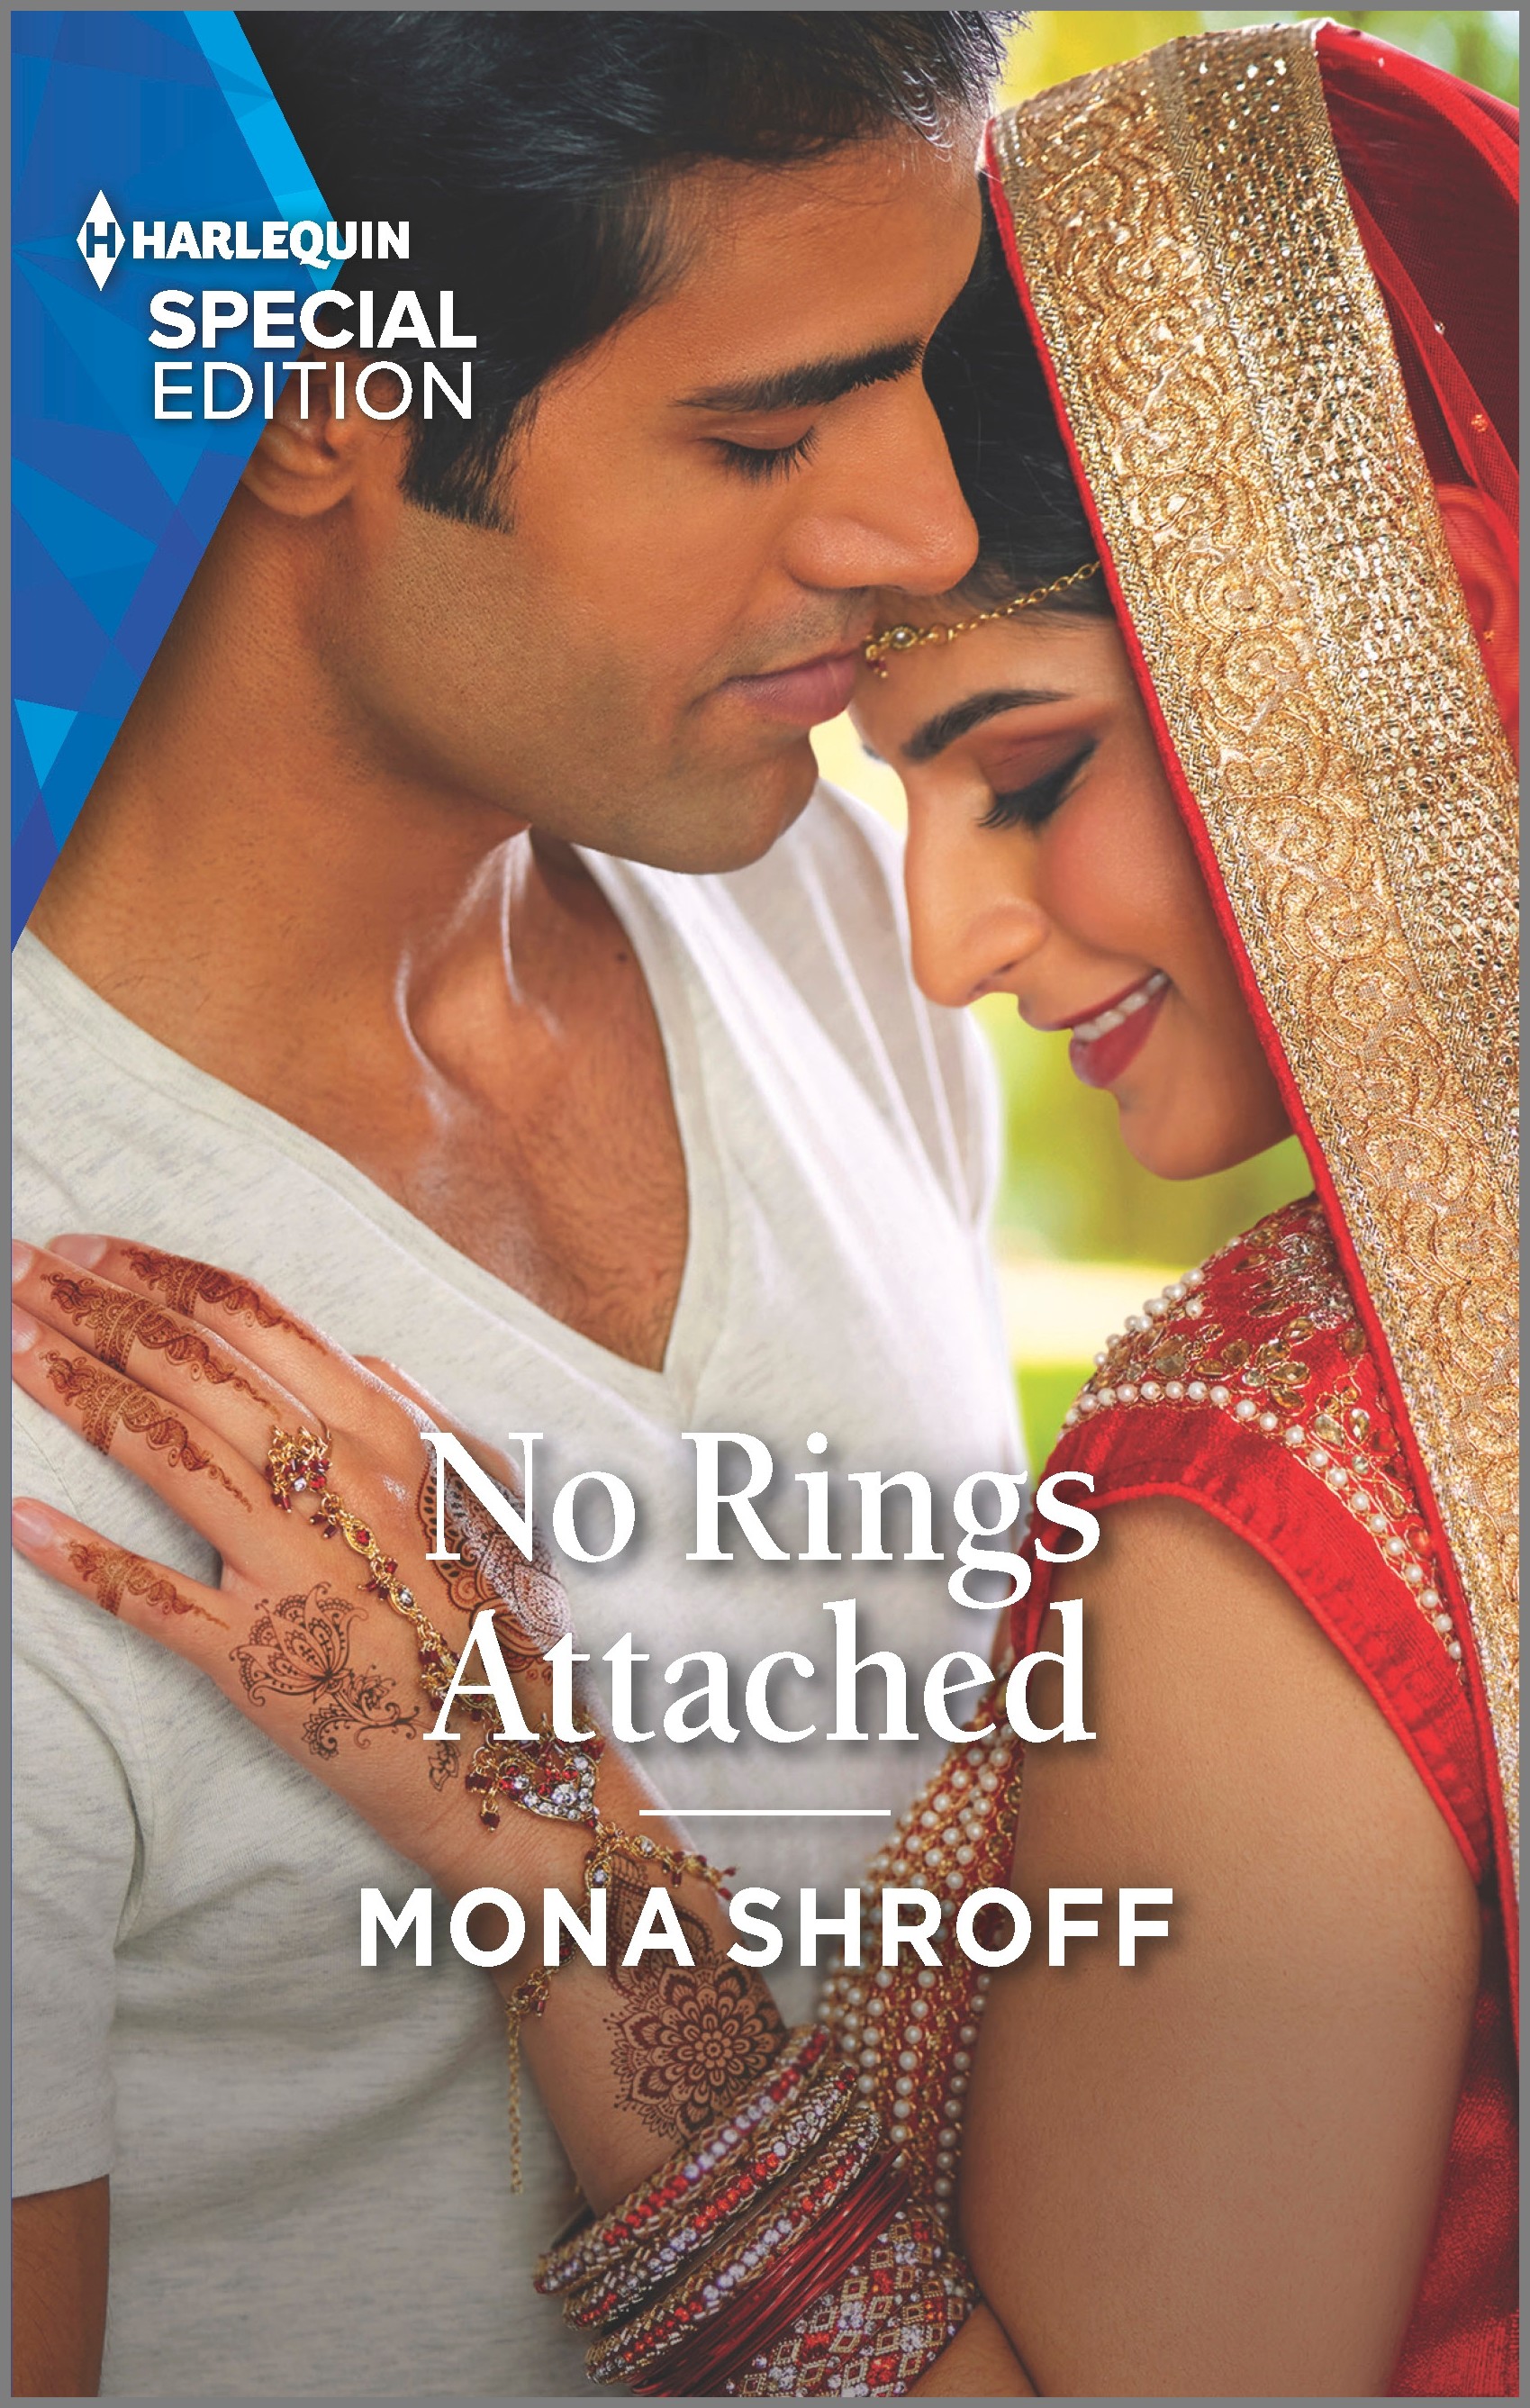 NO RINGS ATTACHED by Mona Shroff